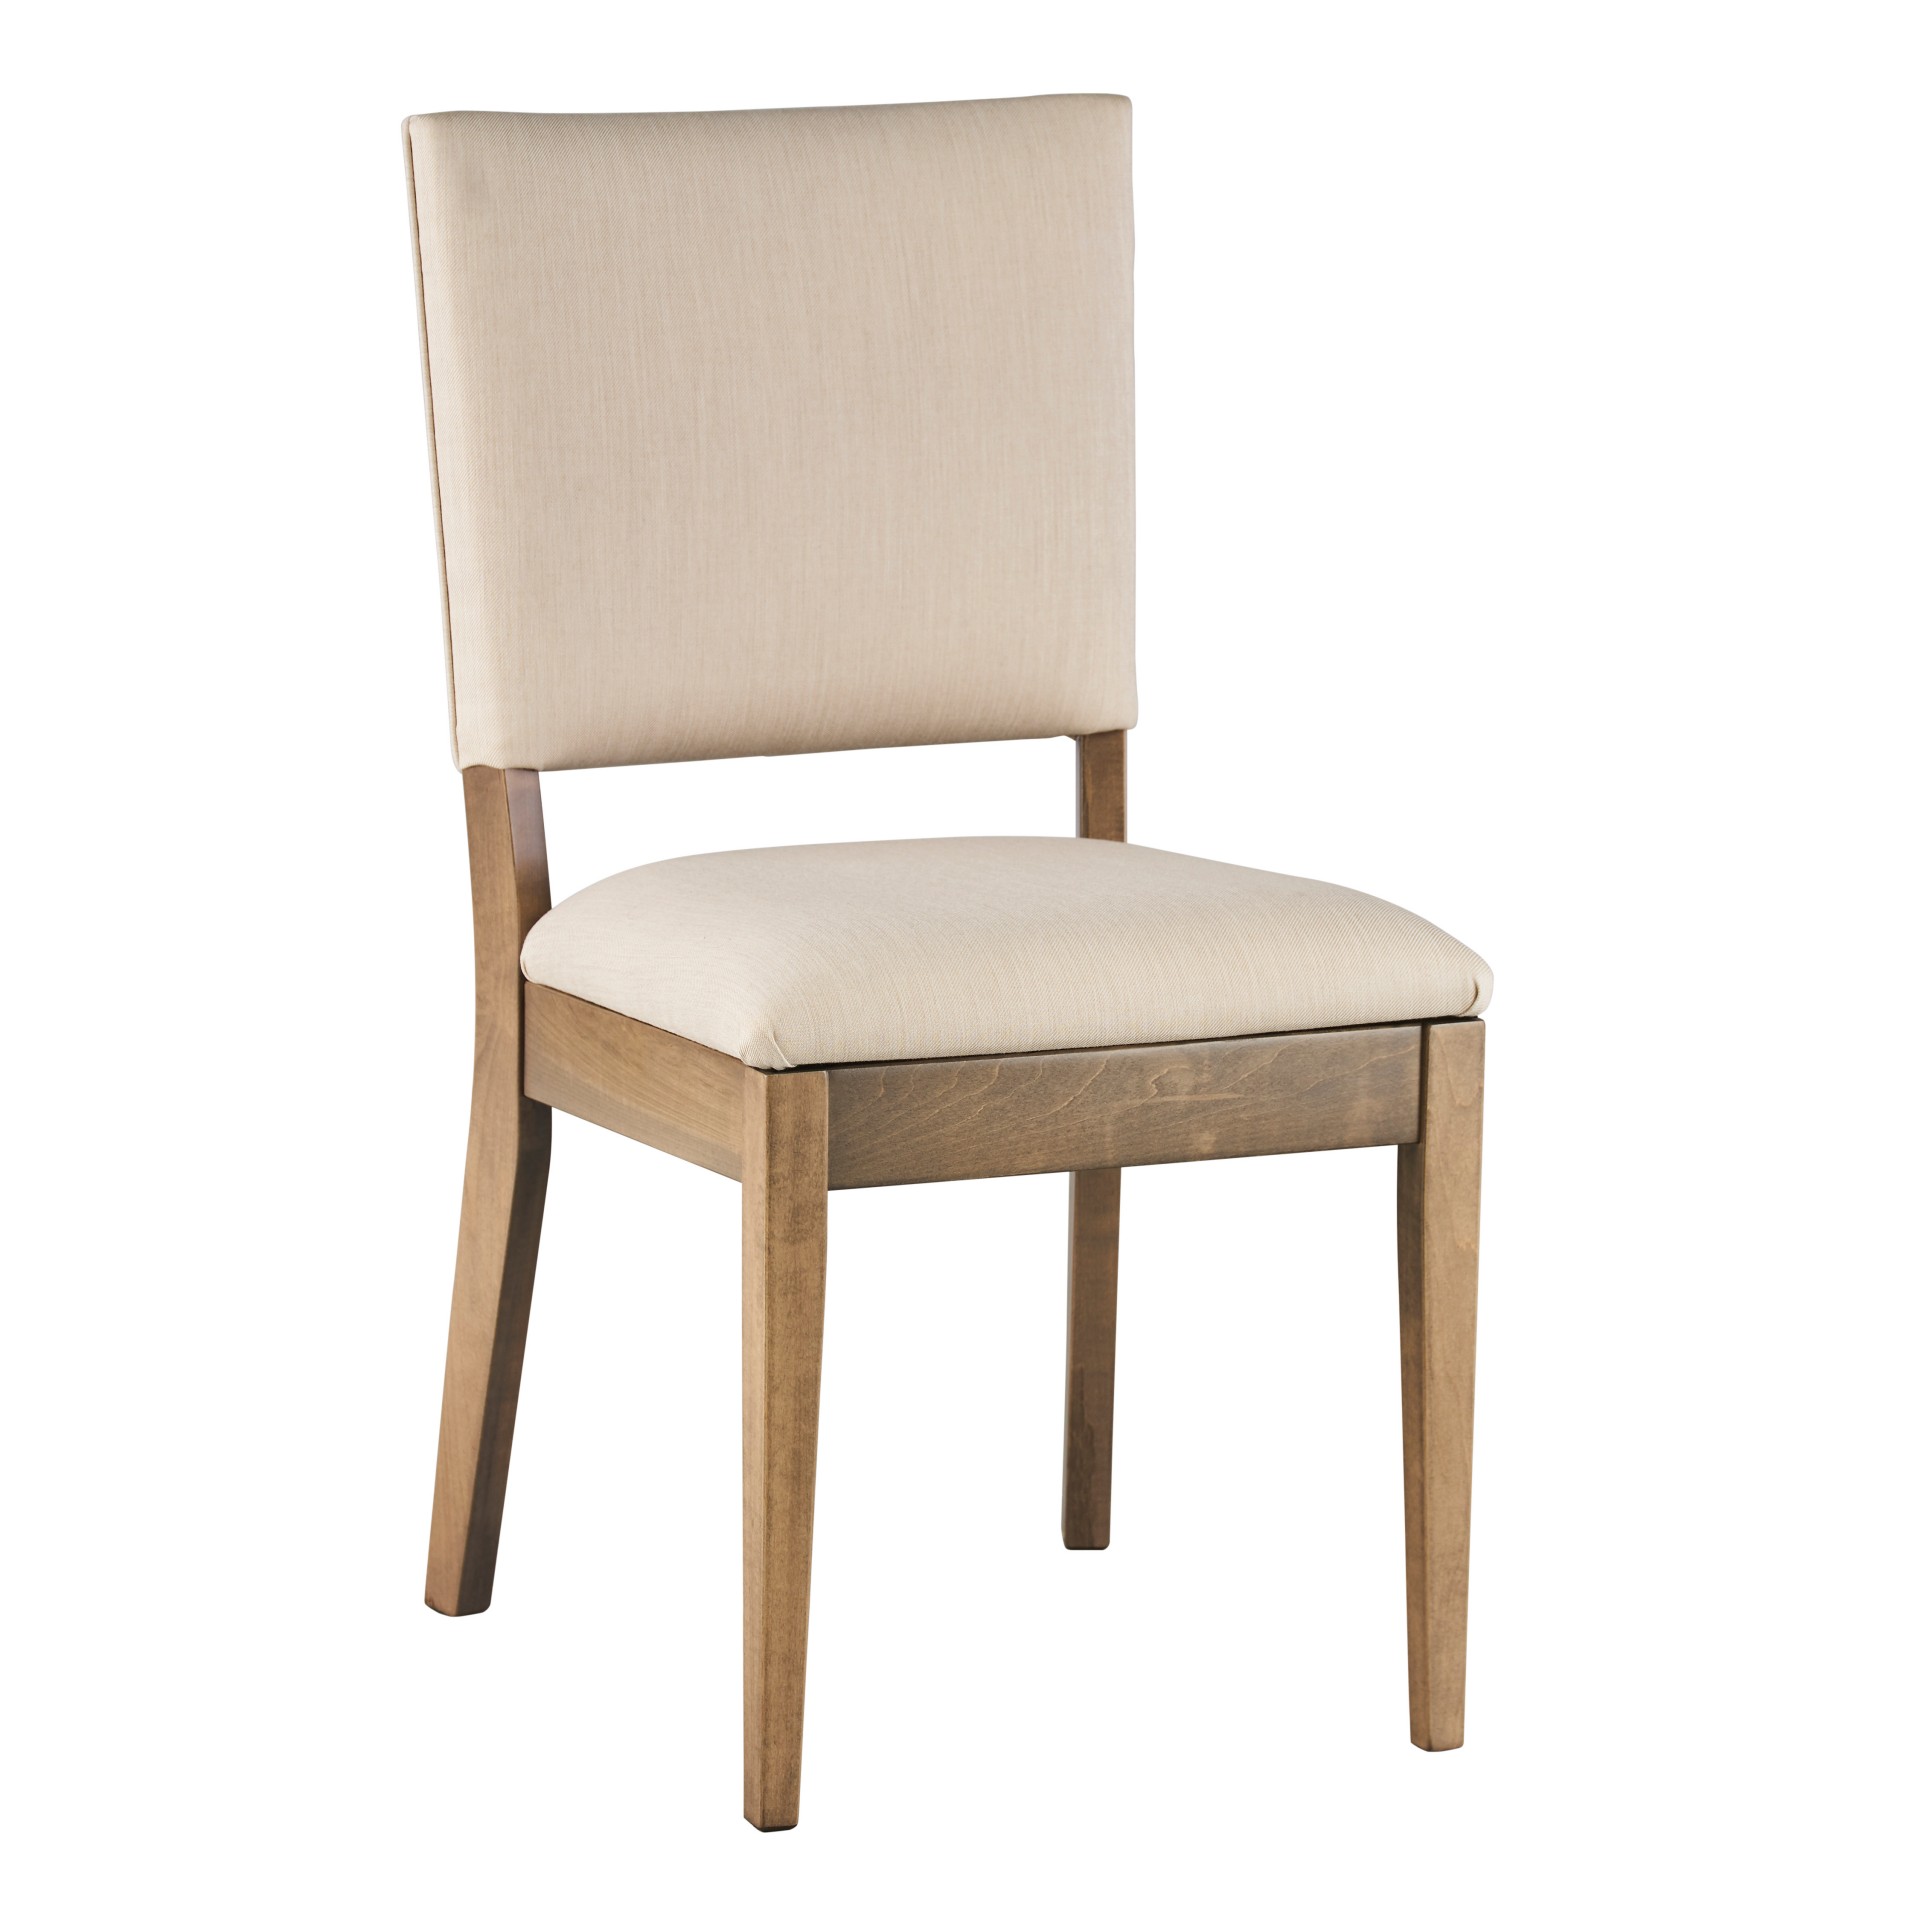 studio upholstered dining chair by barkman furniture